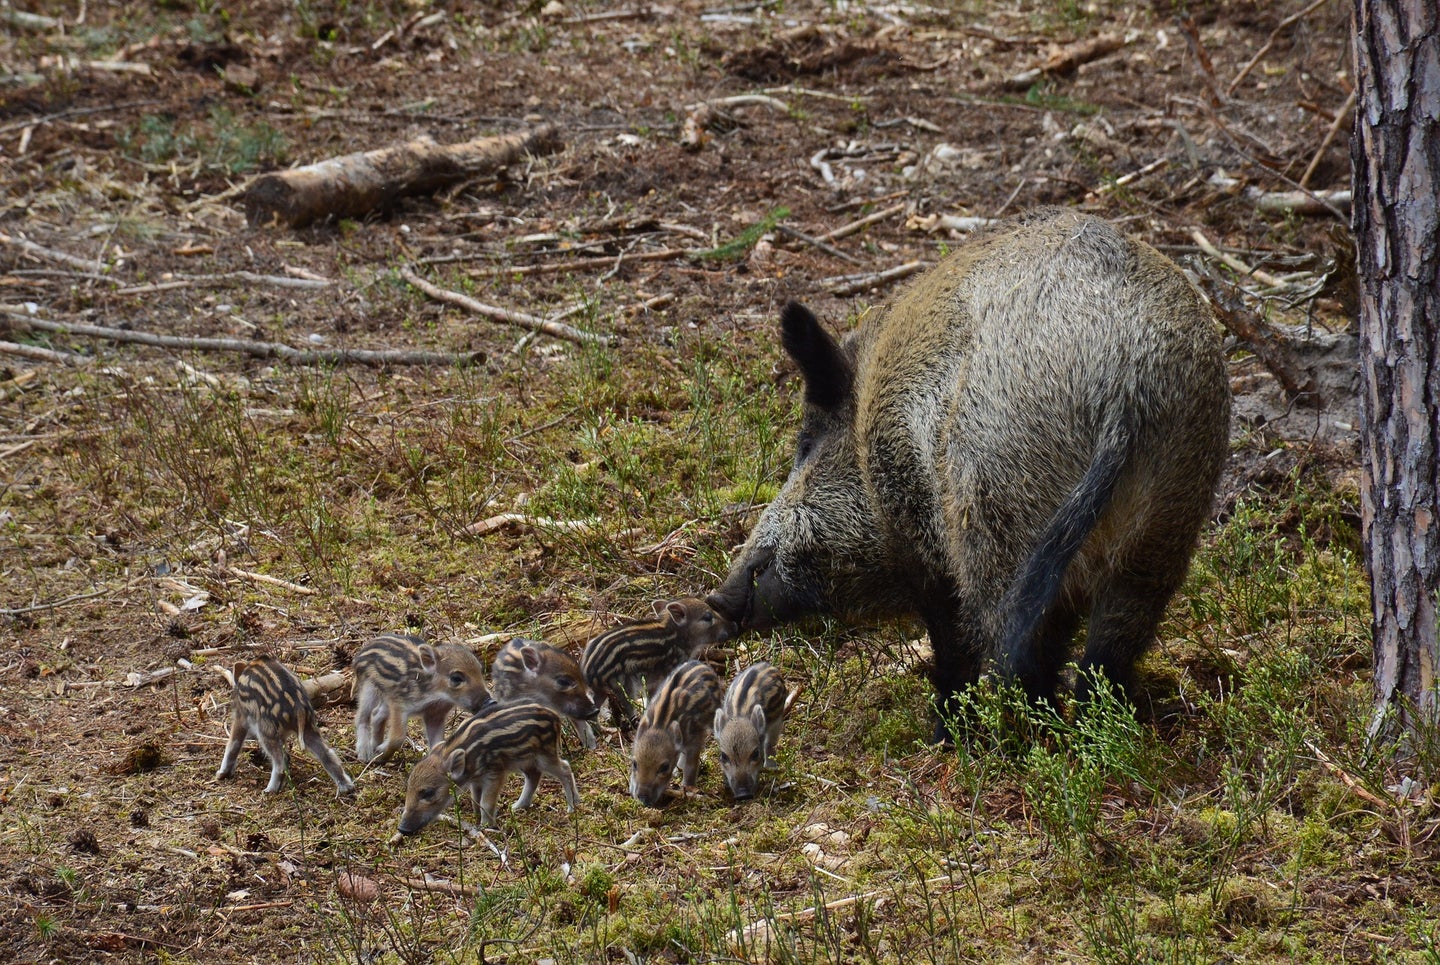 Feral hog contraception is being studied in Texas.